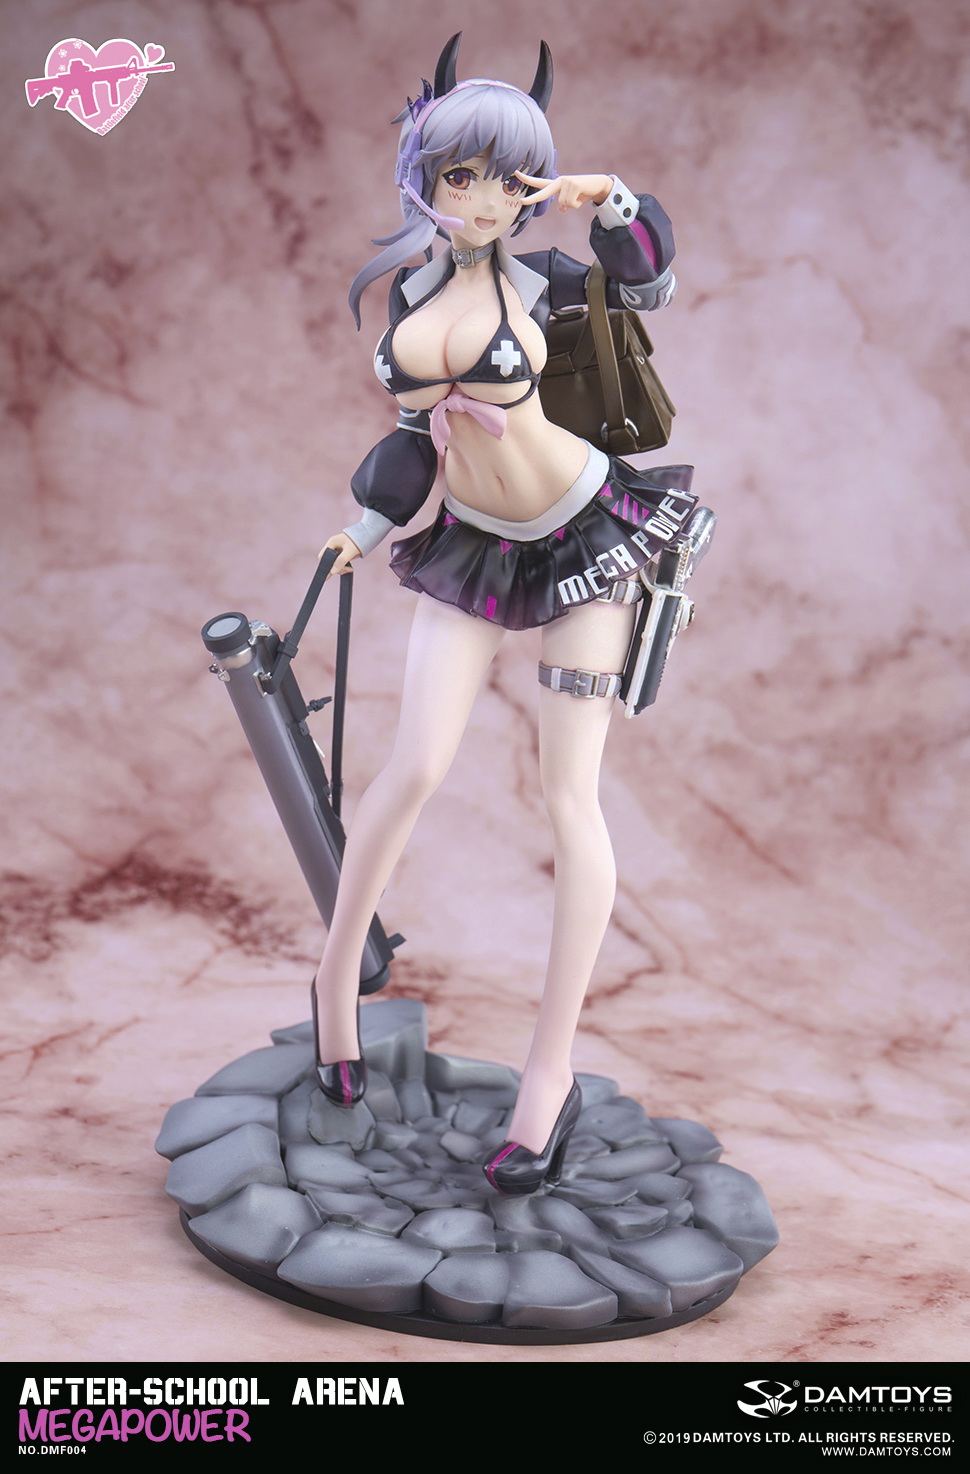 AFTER-SCHOOL ARENA 1/7 SCALE FIGURE: MEGAPOWER Damtoys